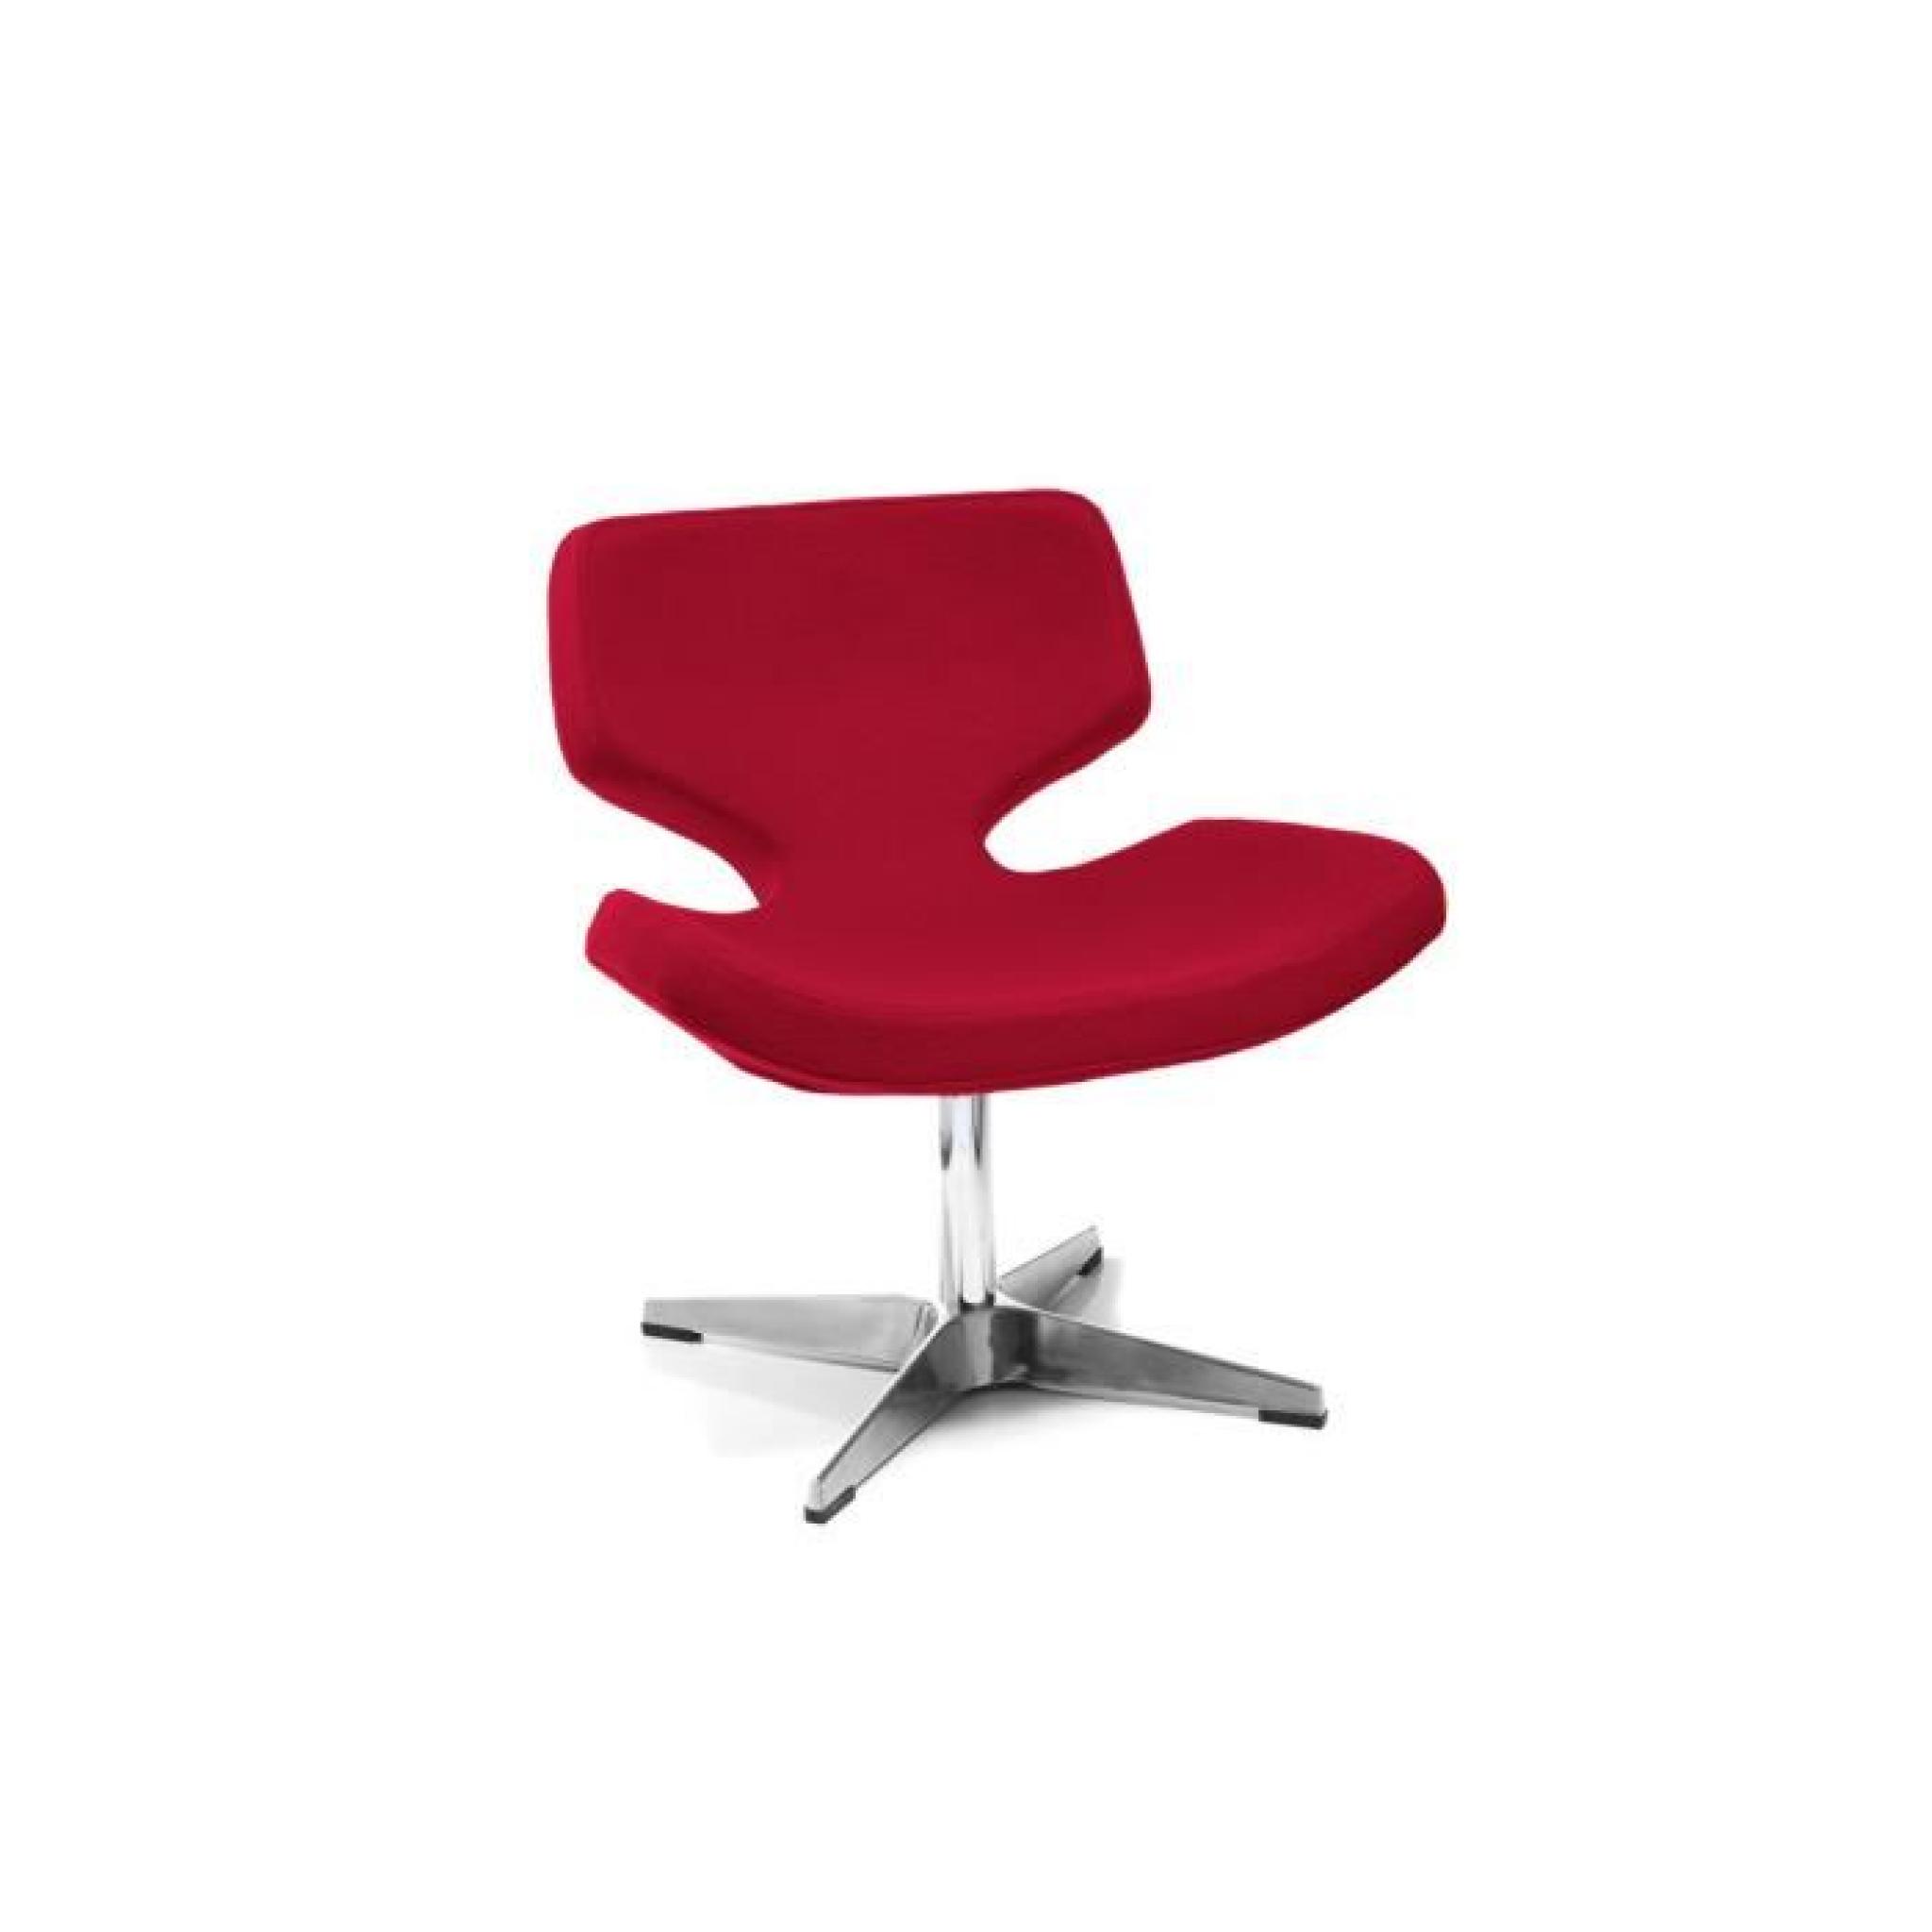 Miliboo - Chaise design polyester rouge et pied… pas cher